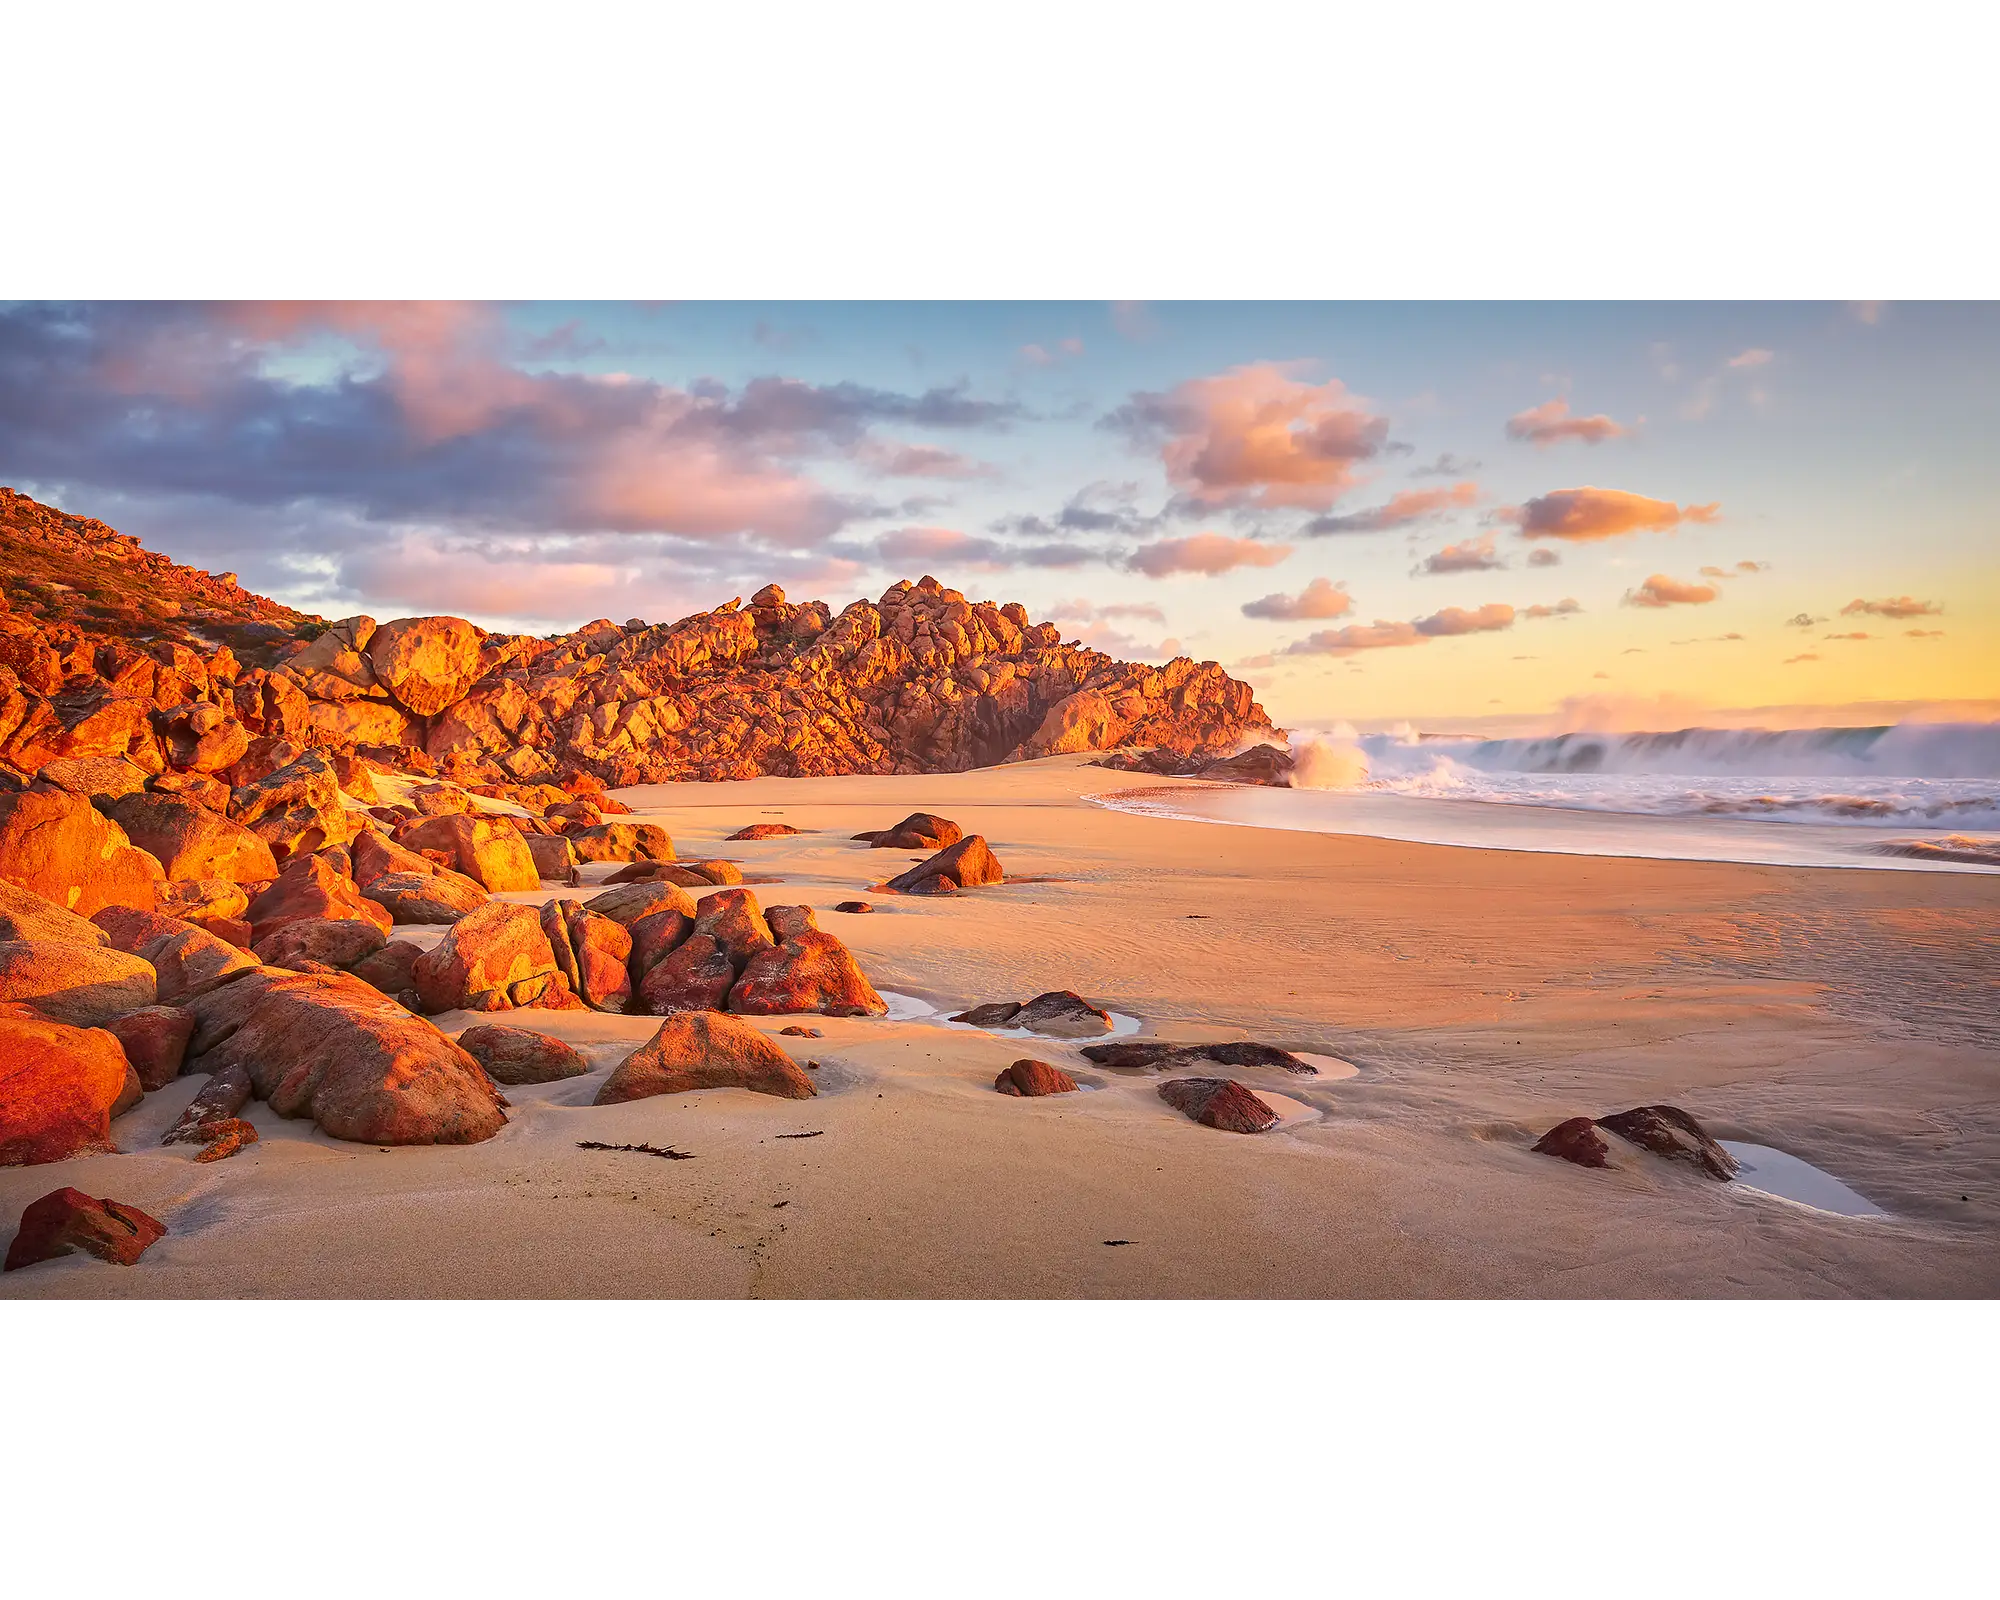 Waves rolling in at Wyadup Beach, bathed in sunset light, WA.